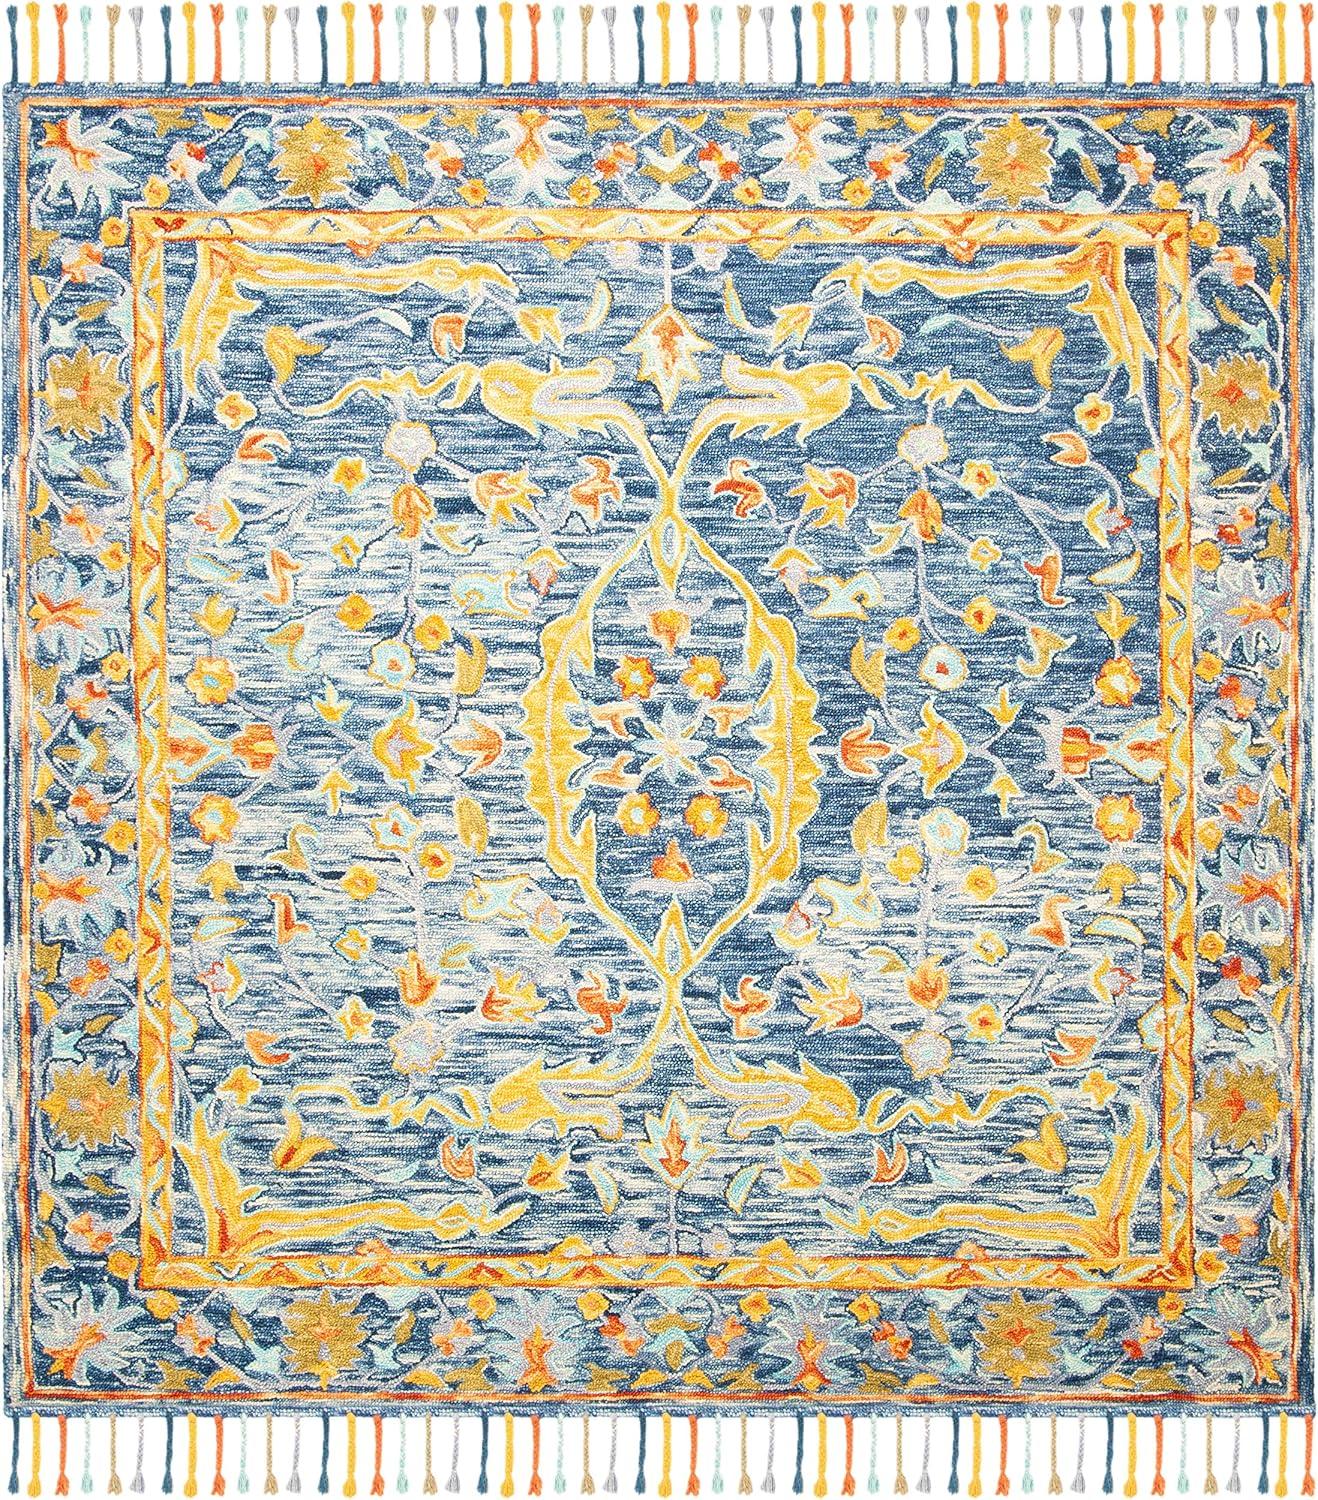 Handmade Tufted Wool Square Area Rug in Blue and Rust, 7' x 7'